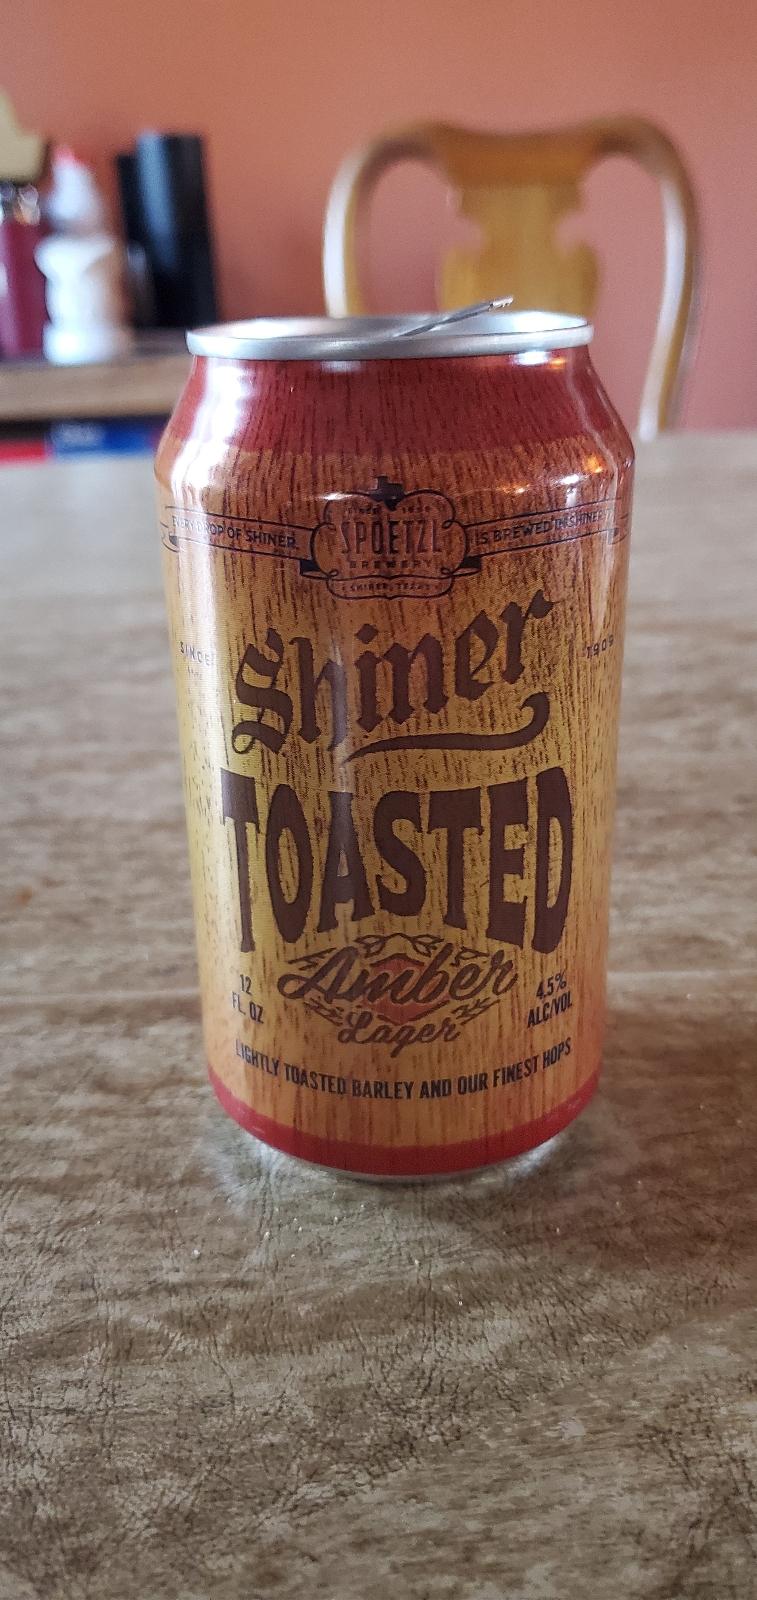 Toasted Amber Lager